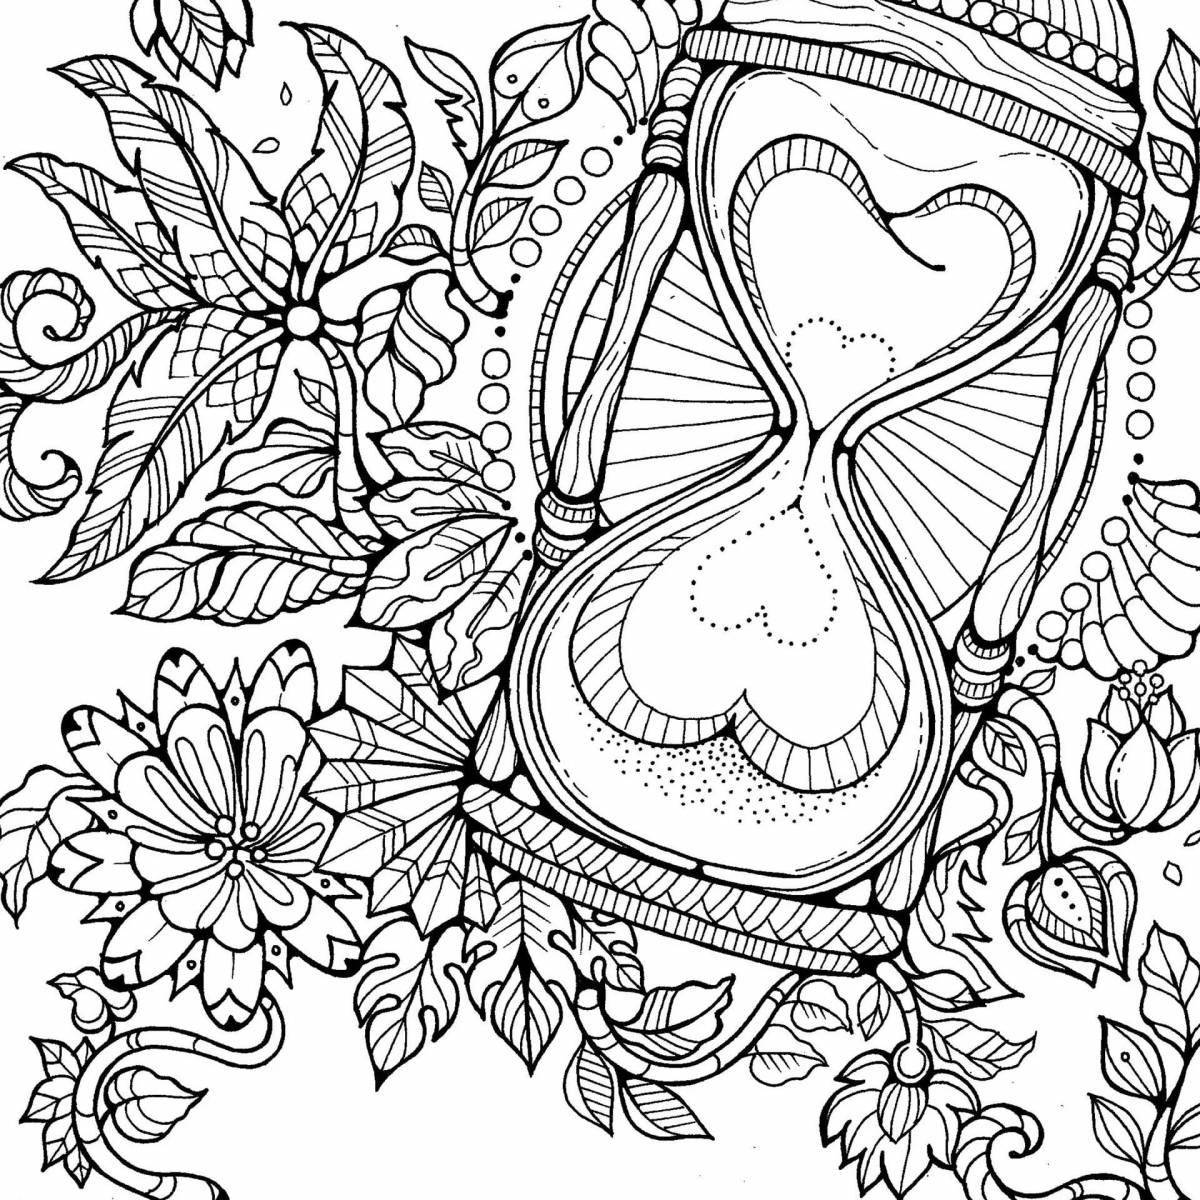 Harmonious coloring for all adults antistress